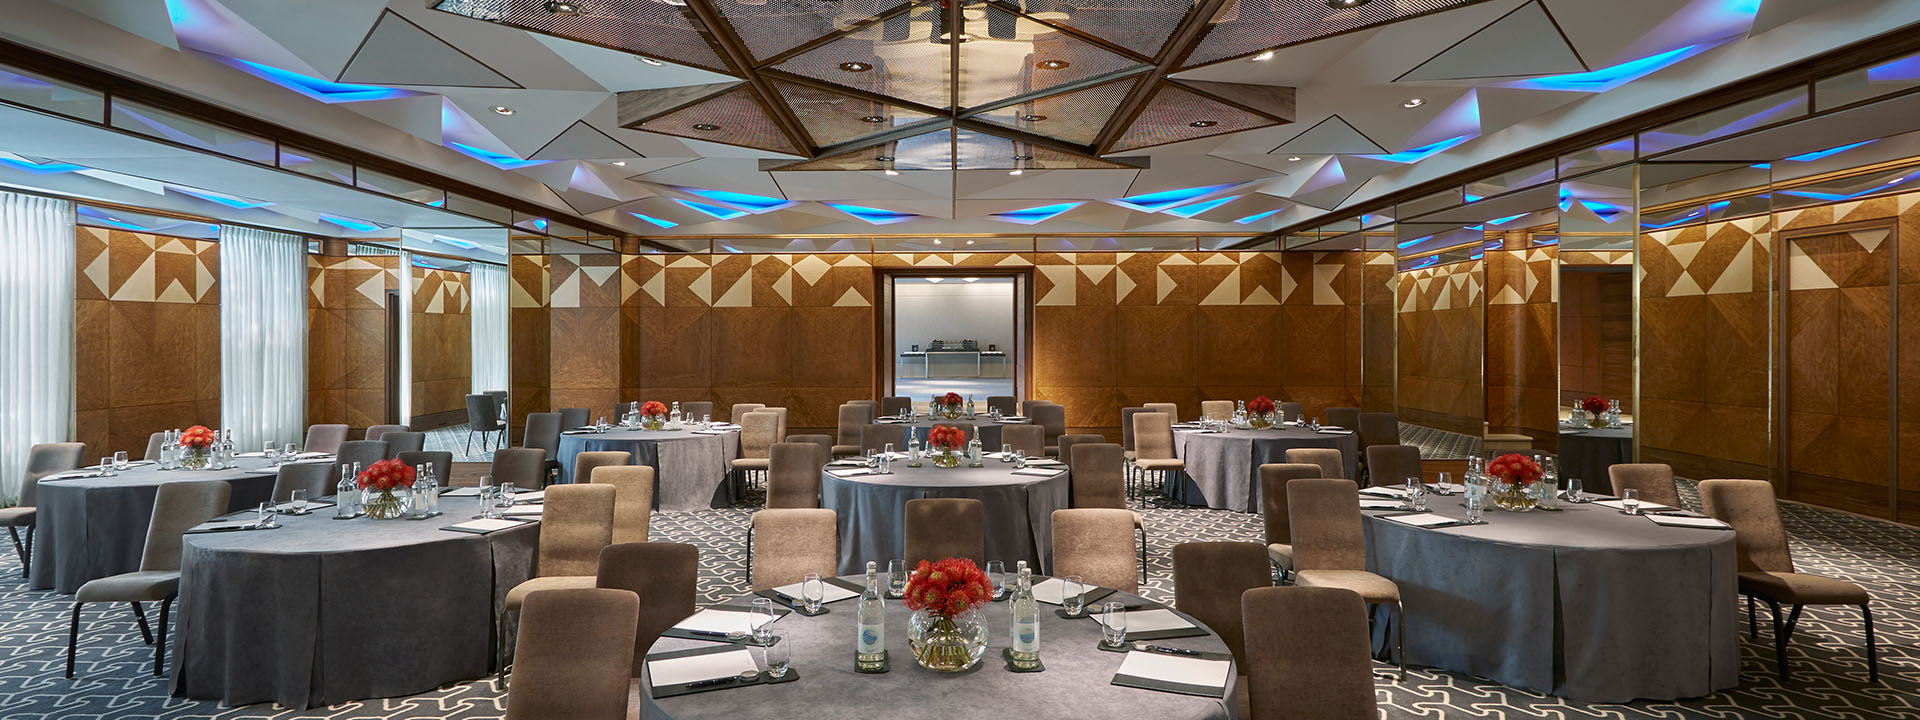 The Ballroom at The Berkeley exudes spaciousness and comfort with plenty of chairs and tables in an innovative style.